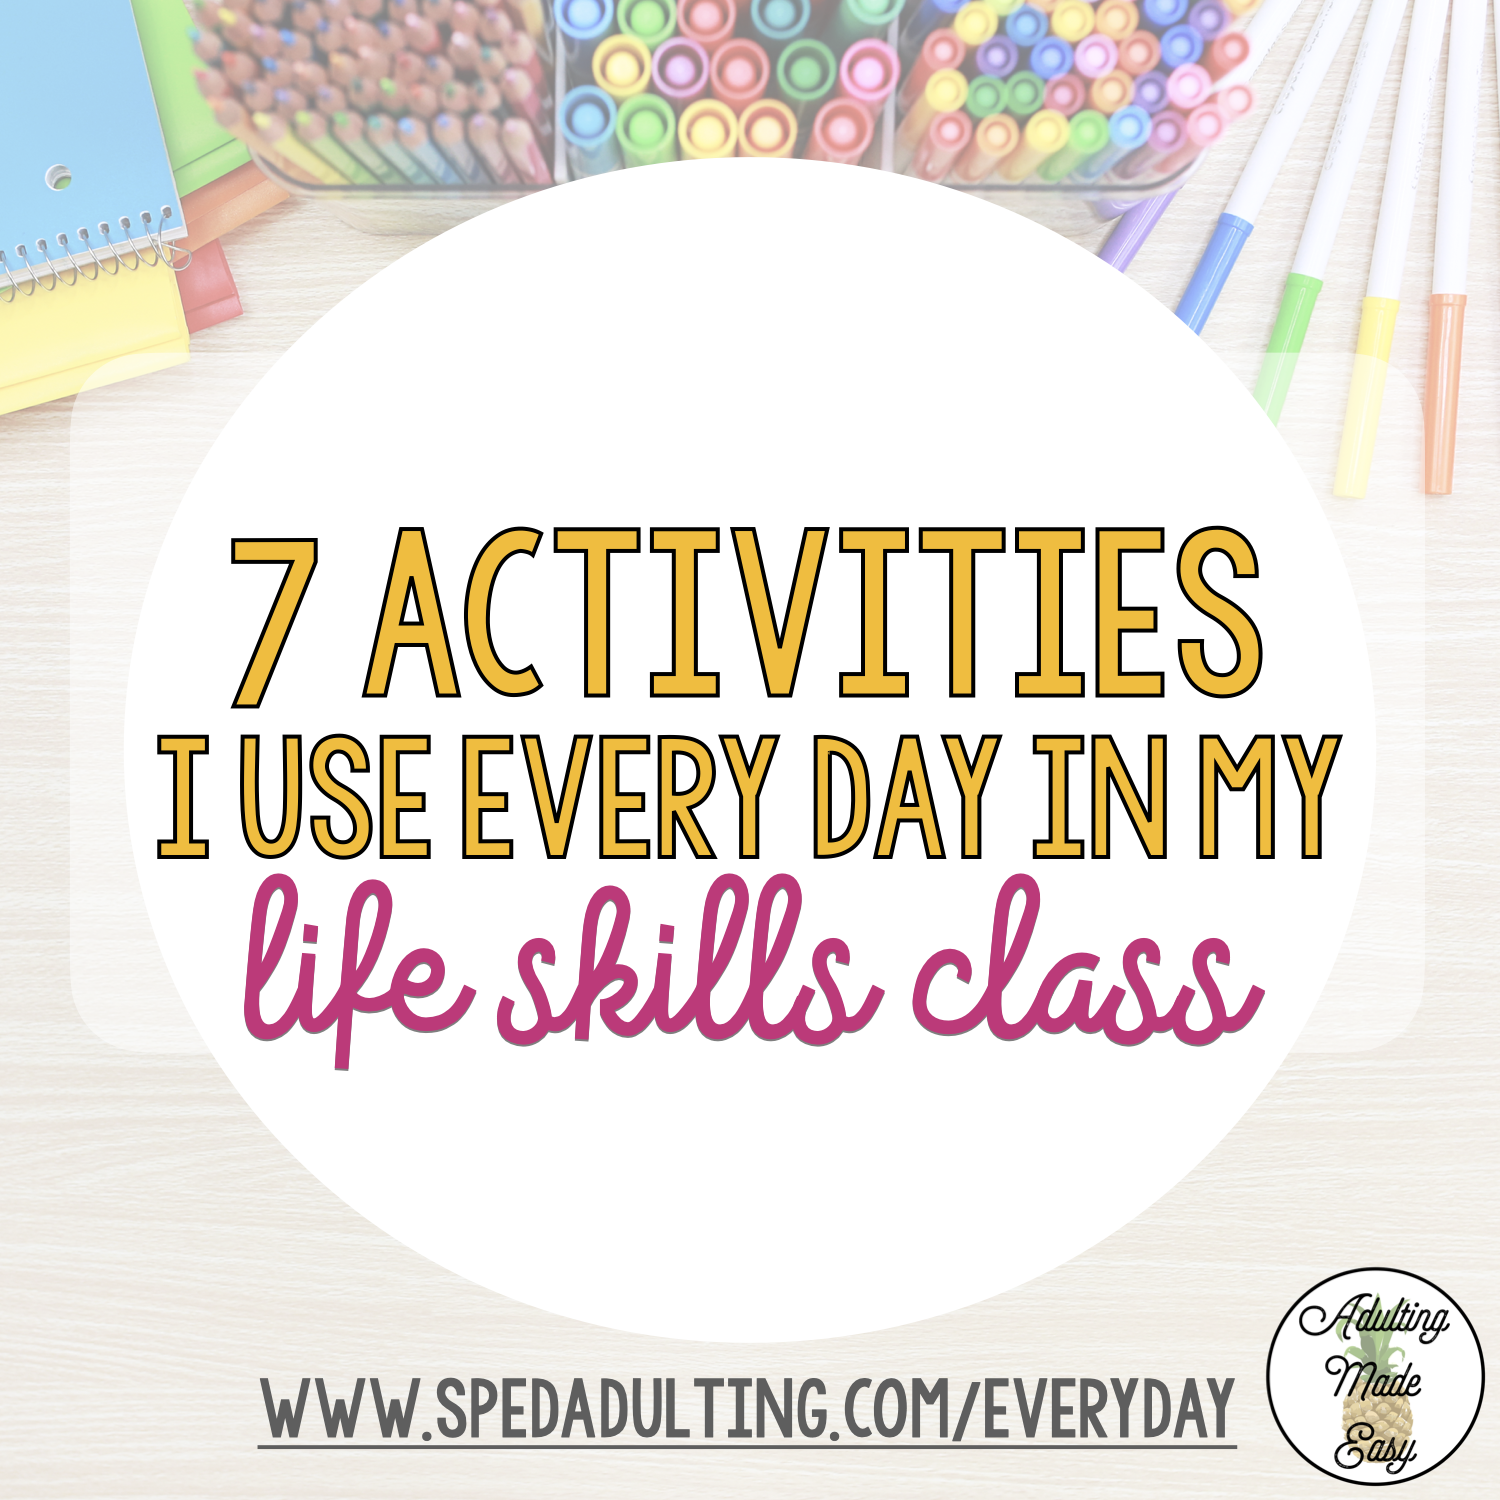 Blog: 7 Activities I use everyday in my life skills class